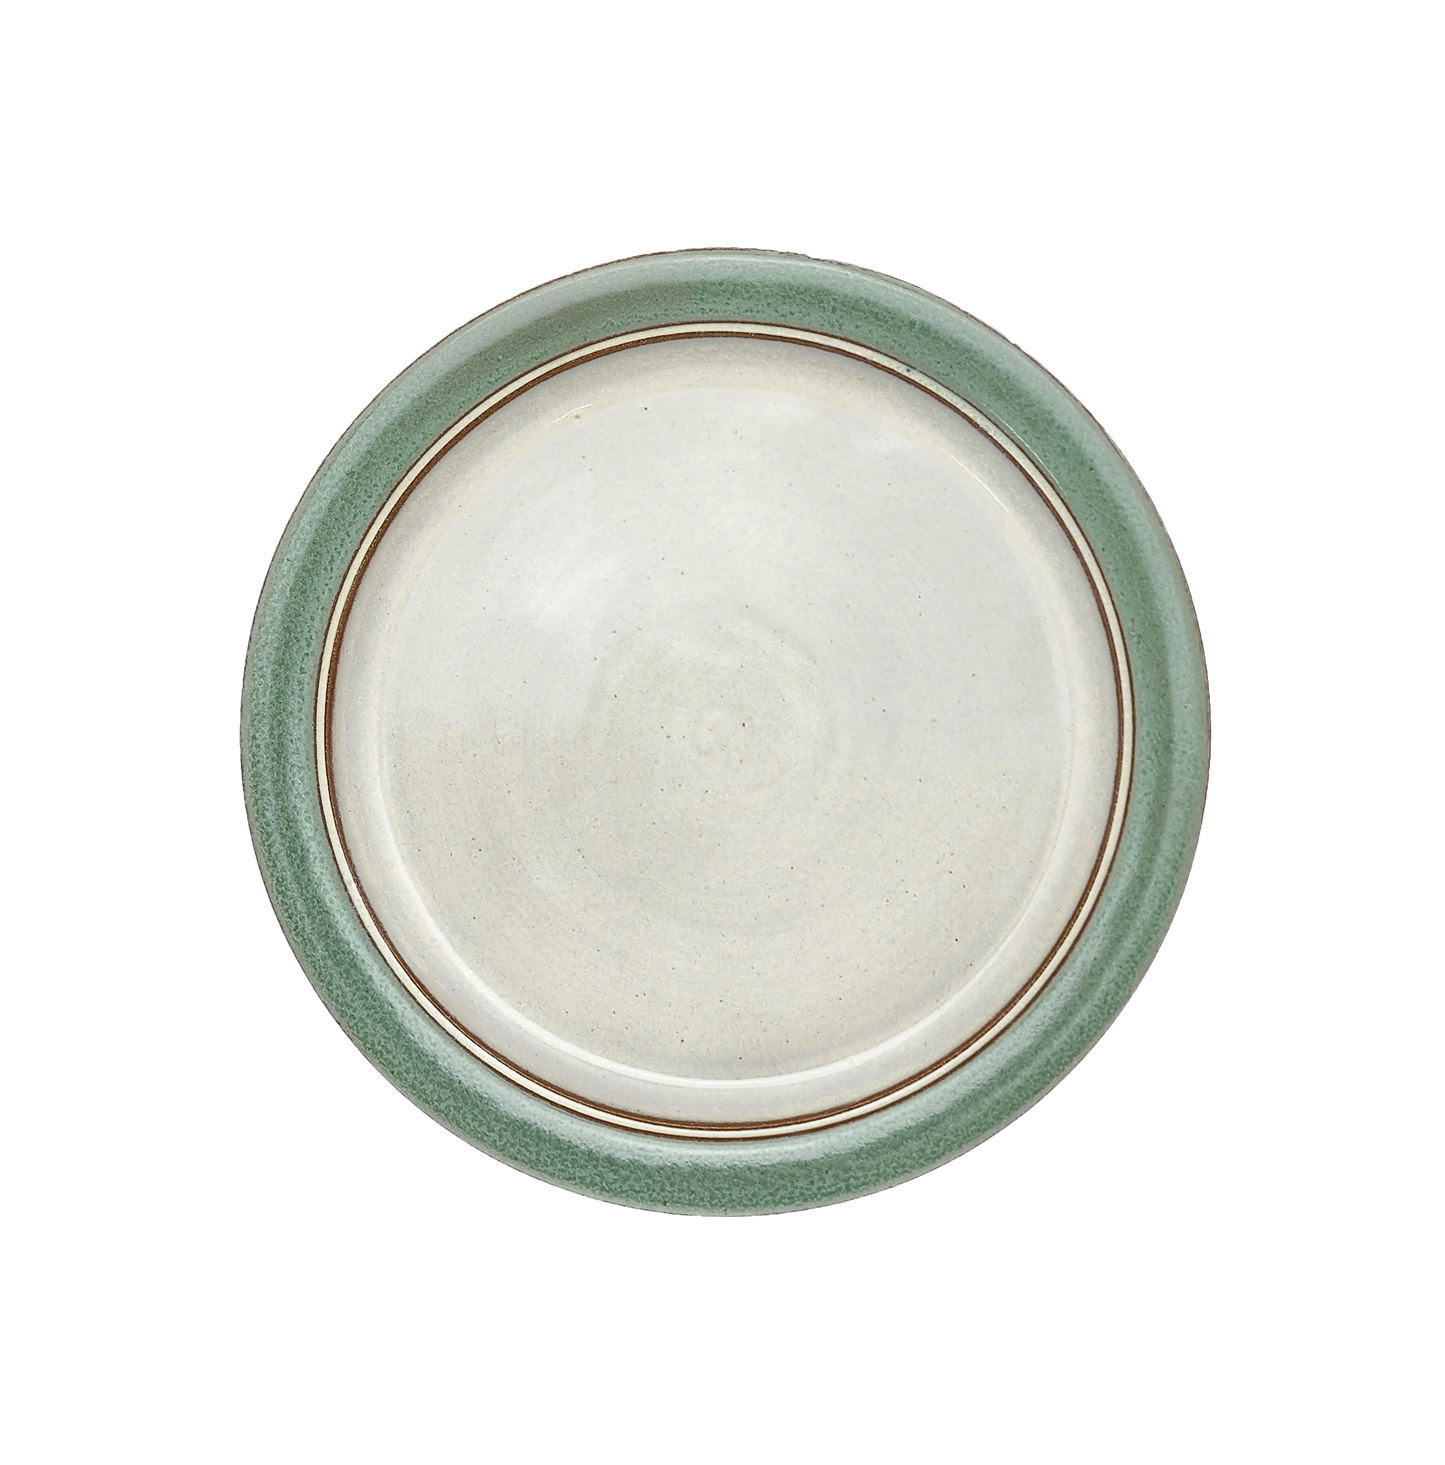 Image Description for Large Dinner Plate (10") in Light Green: A serene light green dinner plate from Clinton Pottery's Handmade Dinnerware Collection. The 10-inch plate features a gentle green glaze, evoking the tranquility of a spring meadow. Its ample size makes it an ideal choice for serving a delightful dinner with a touch of natural charm and freshness.